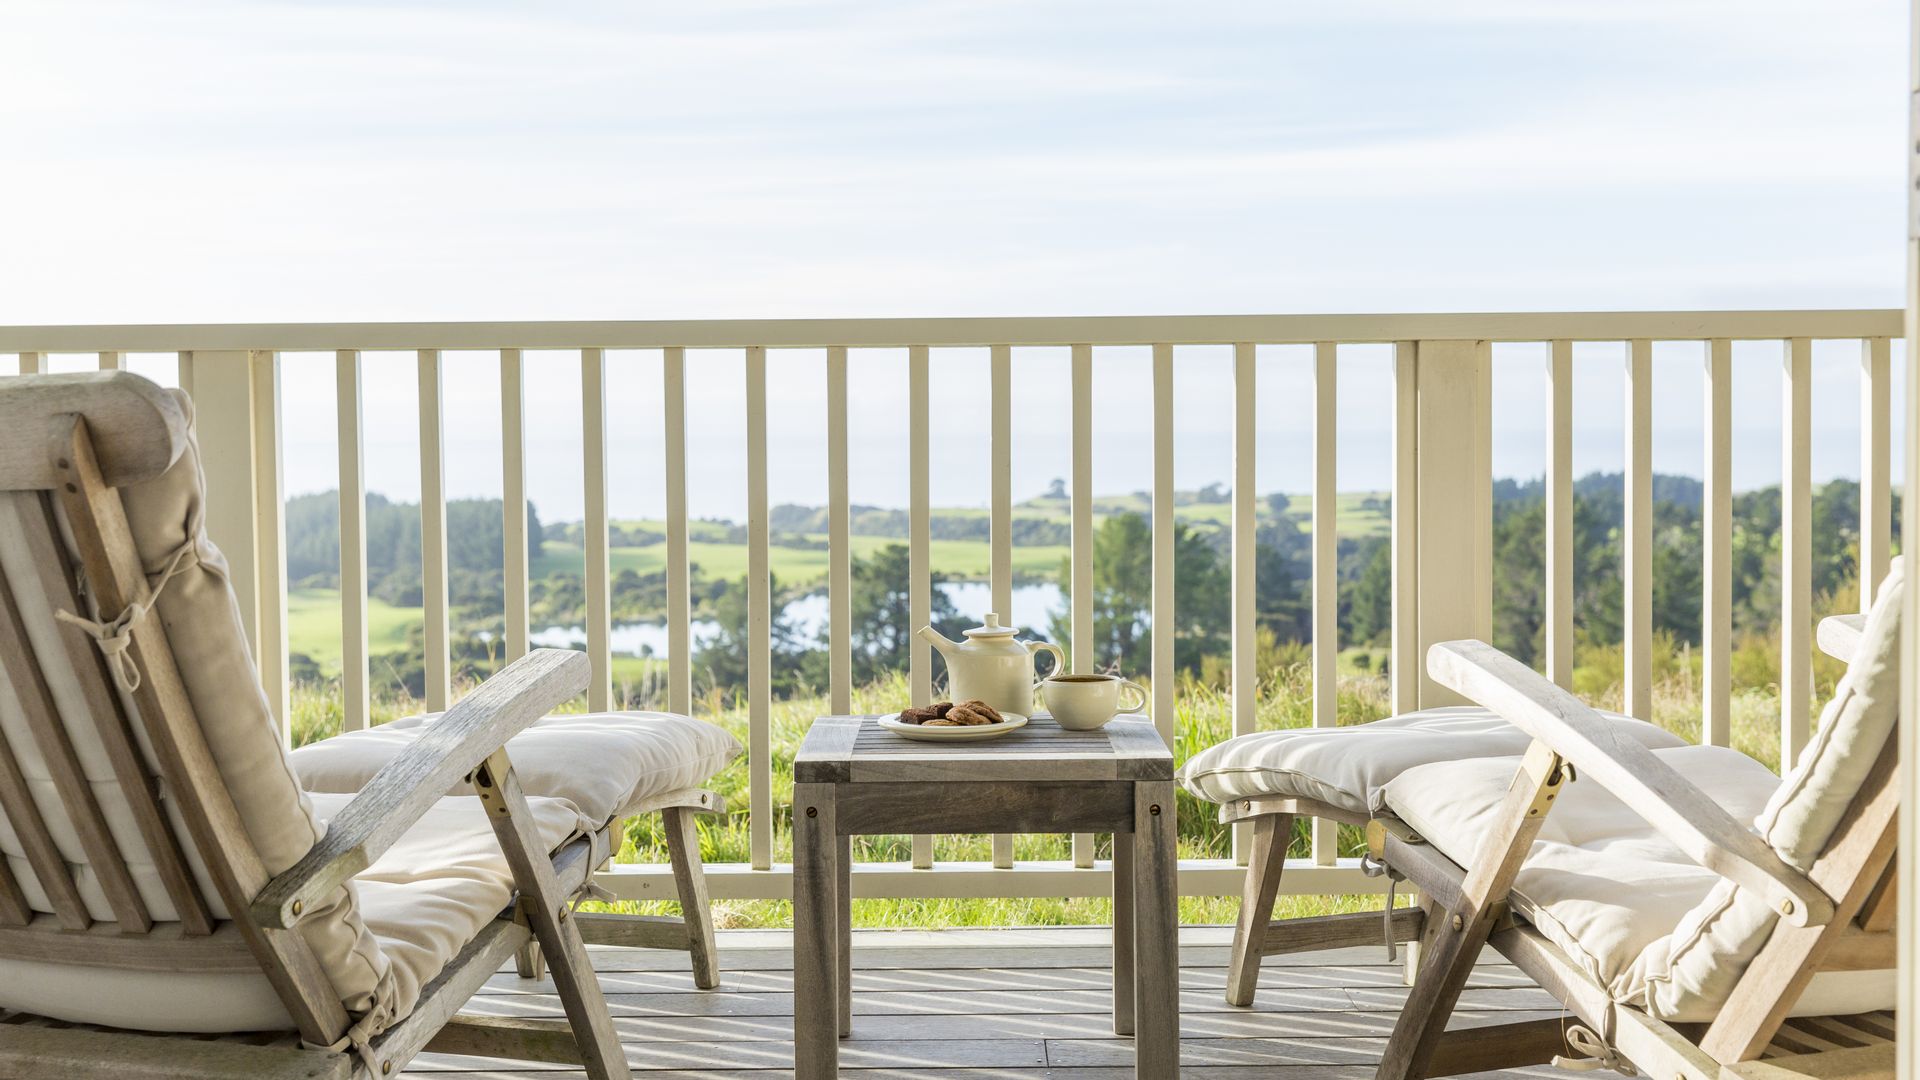 View from a ridge suite balcony, Cape Kidnappers, Hawke's Bay, New Zealand